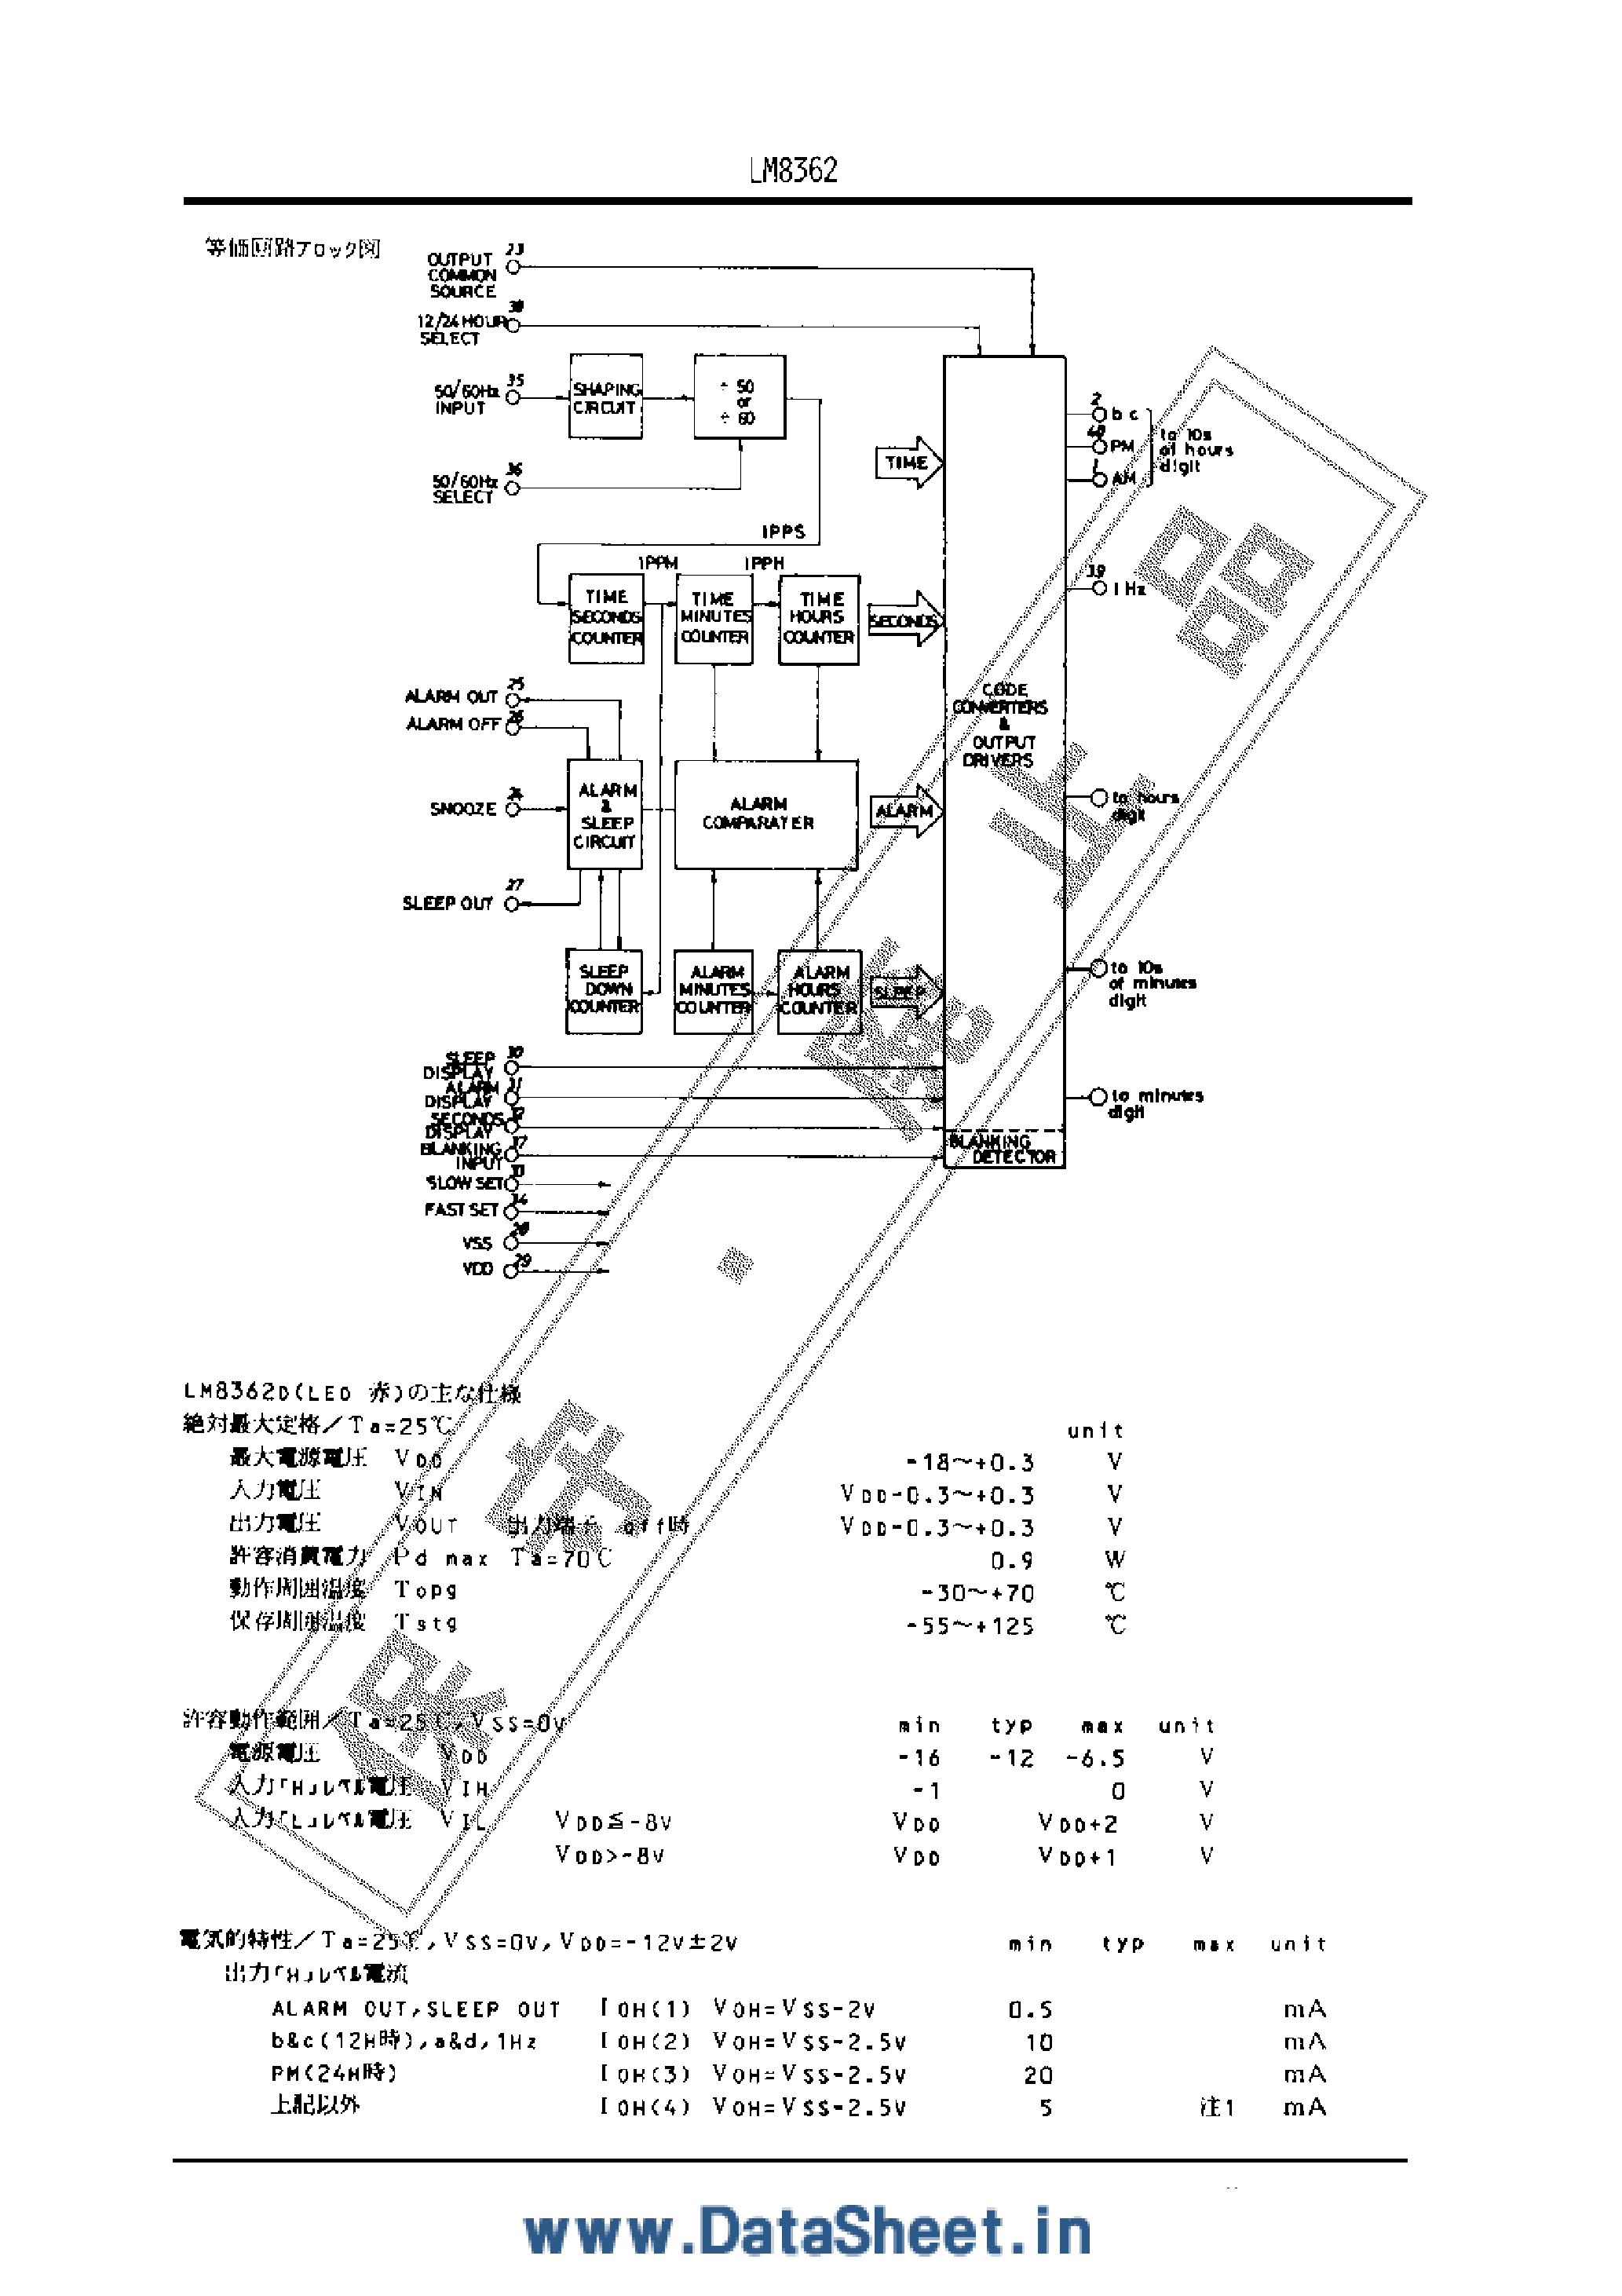 Datasheet LM8362 - LM8362 page 2